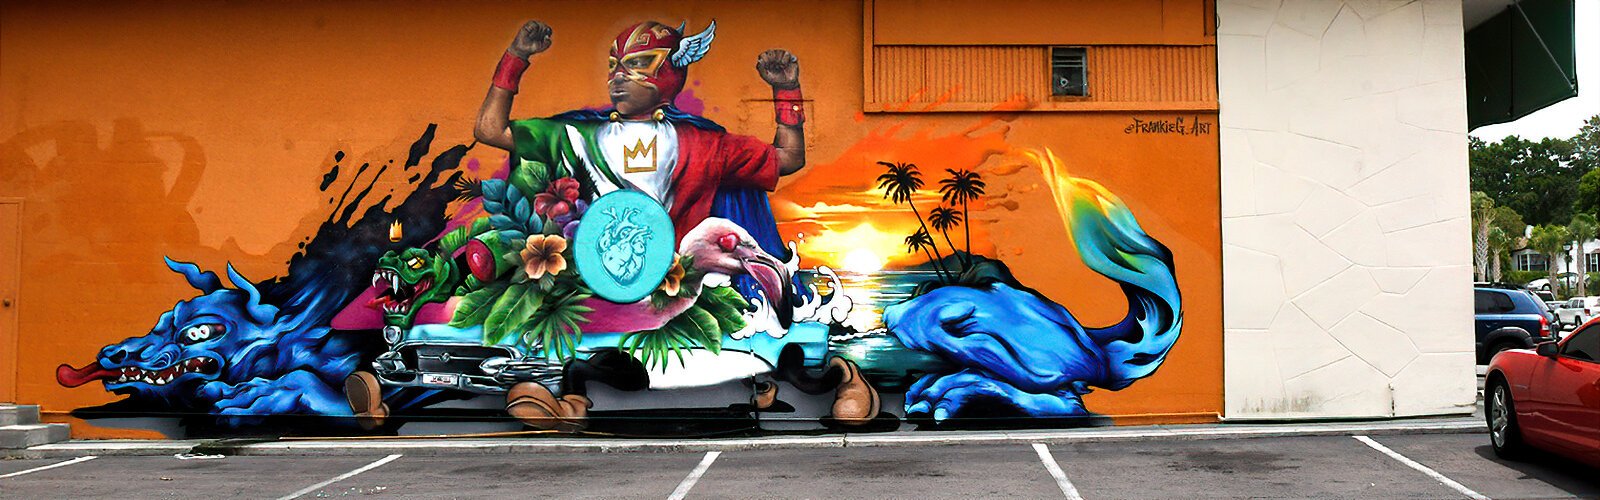 Artist Frankie G created the mural “Familia” at El Ranchito De Pepe in Clearwater's Downtown Gateway area for the Art Oasis Mural Festival.